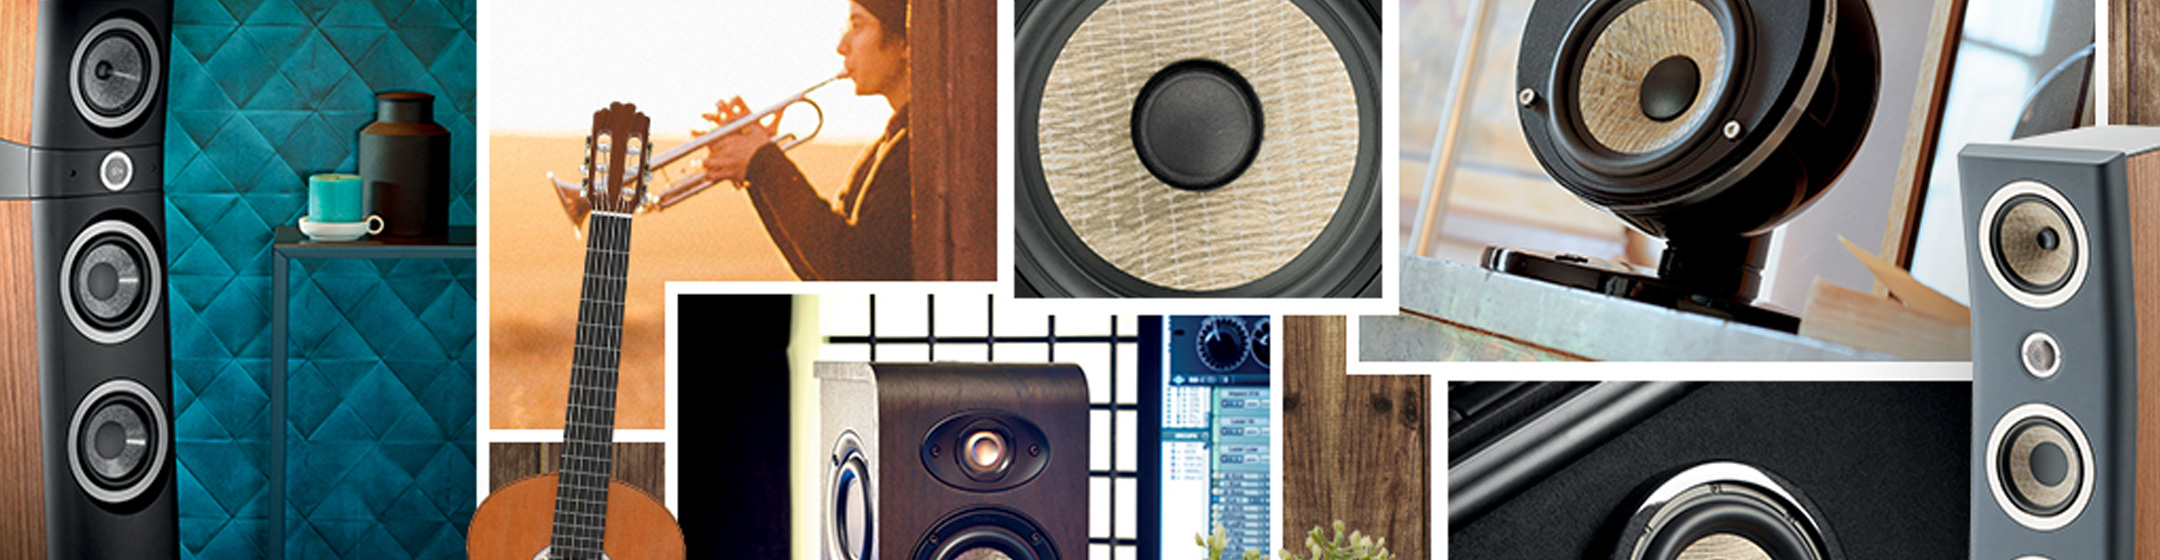 A collage of pics showing Focal speakers in different room settings